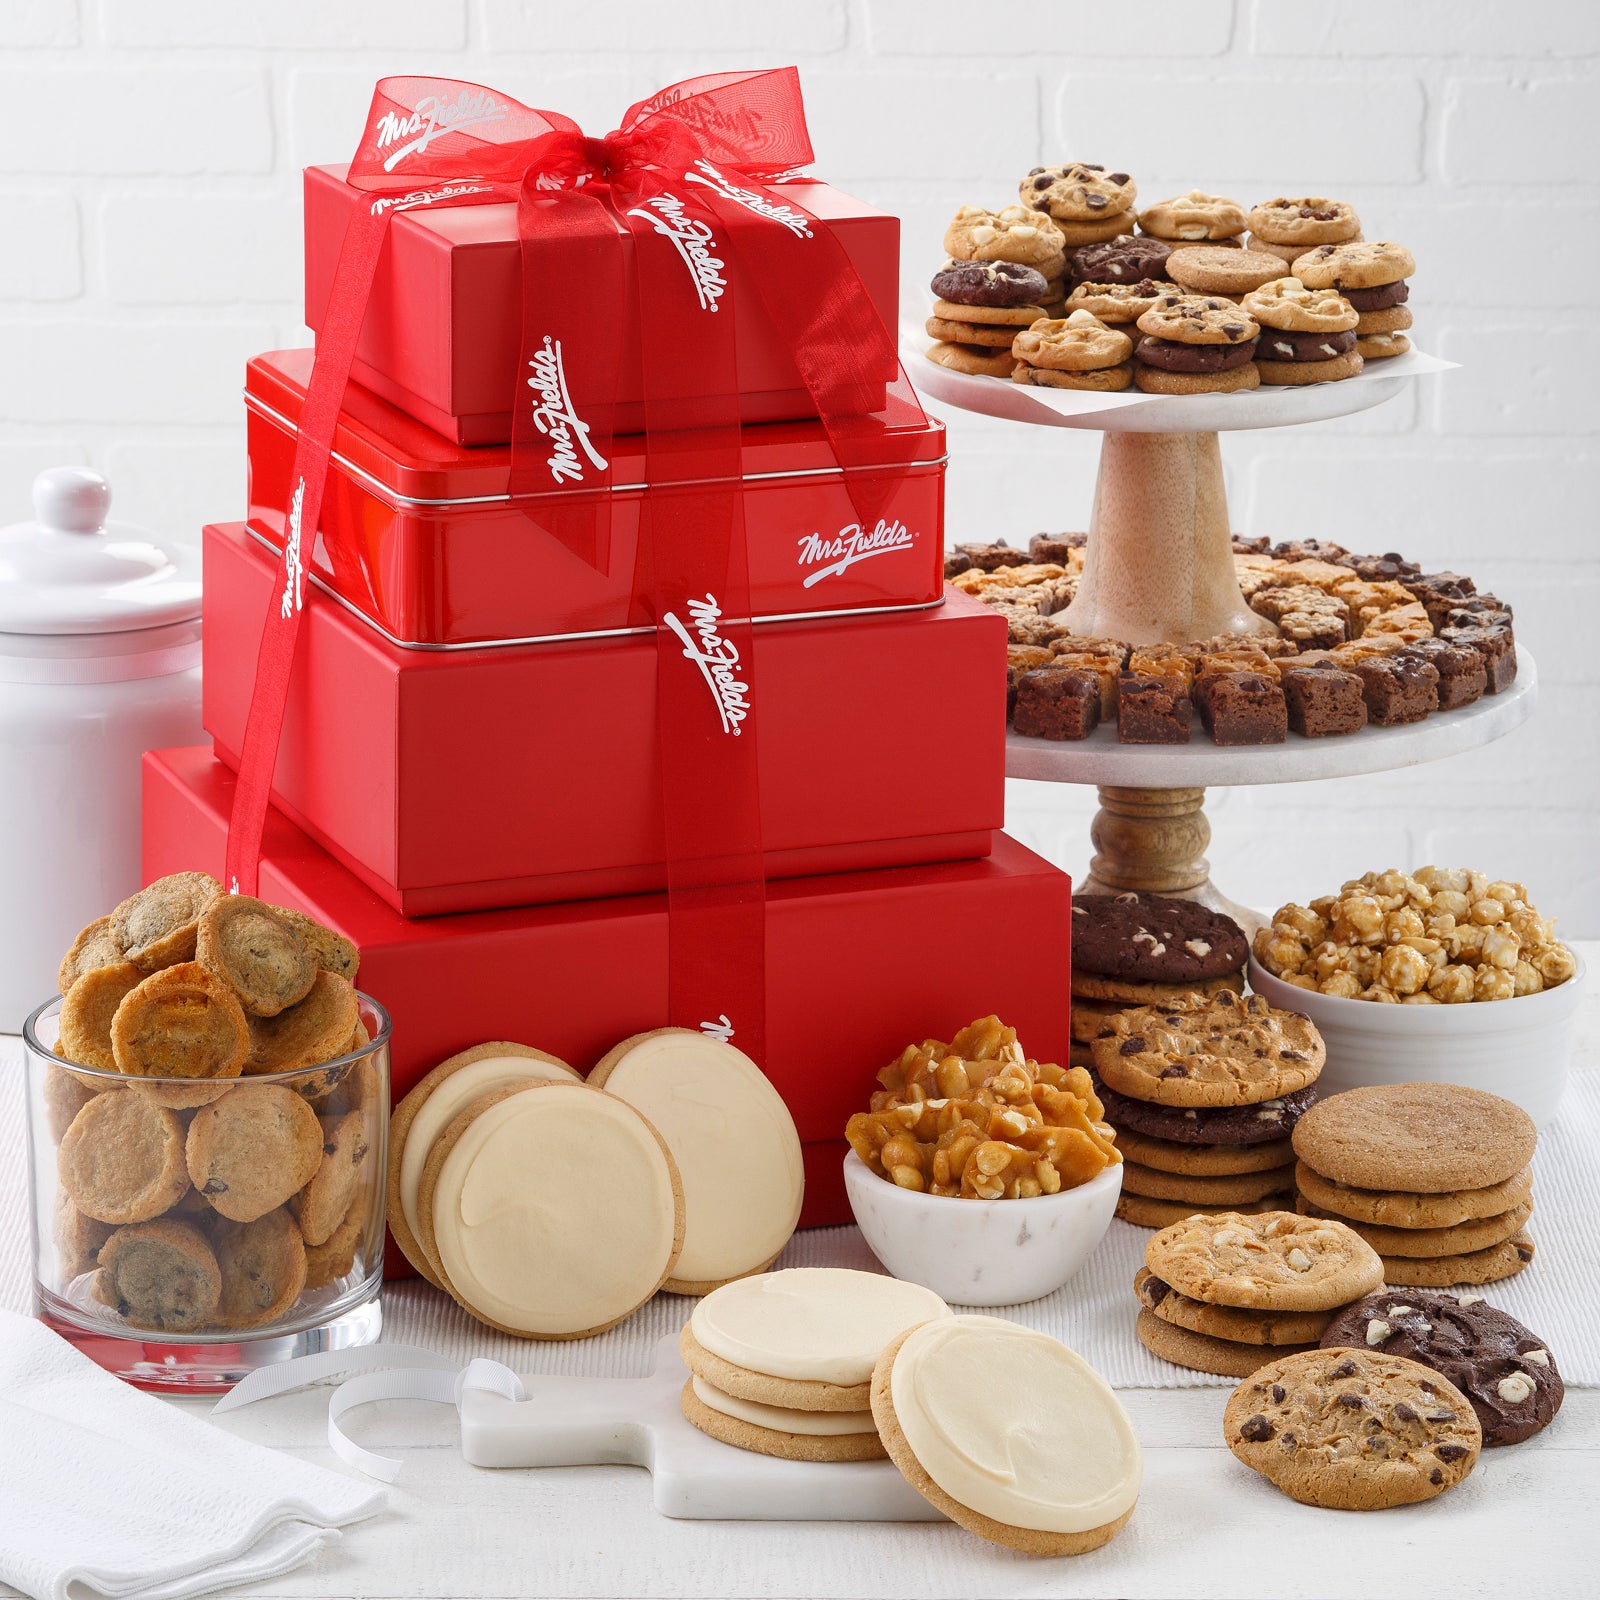 A four tier red tower tied with Mrs Fields ribbon and surrounded by an assortment of Nibblers®, original cookies, brownie bites, frosted cookies, muffins, popcorn, and peanut brittle.